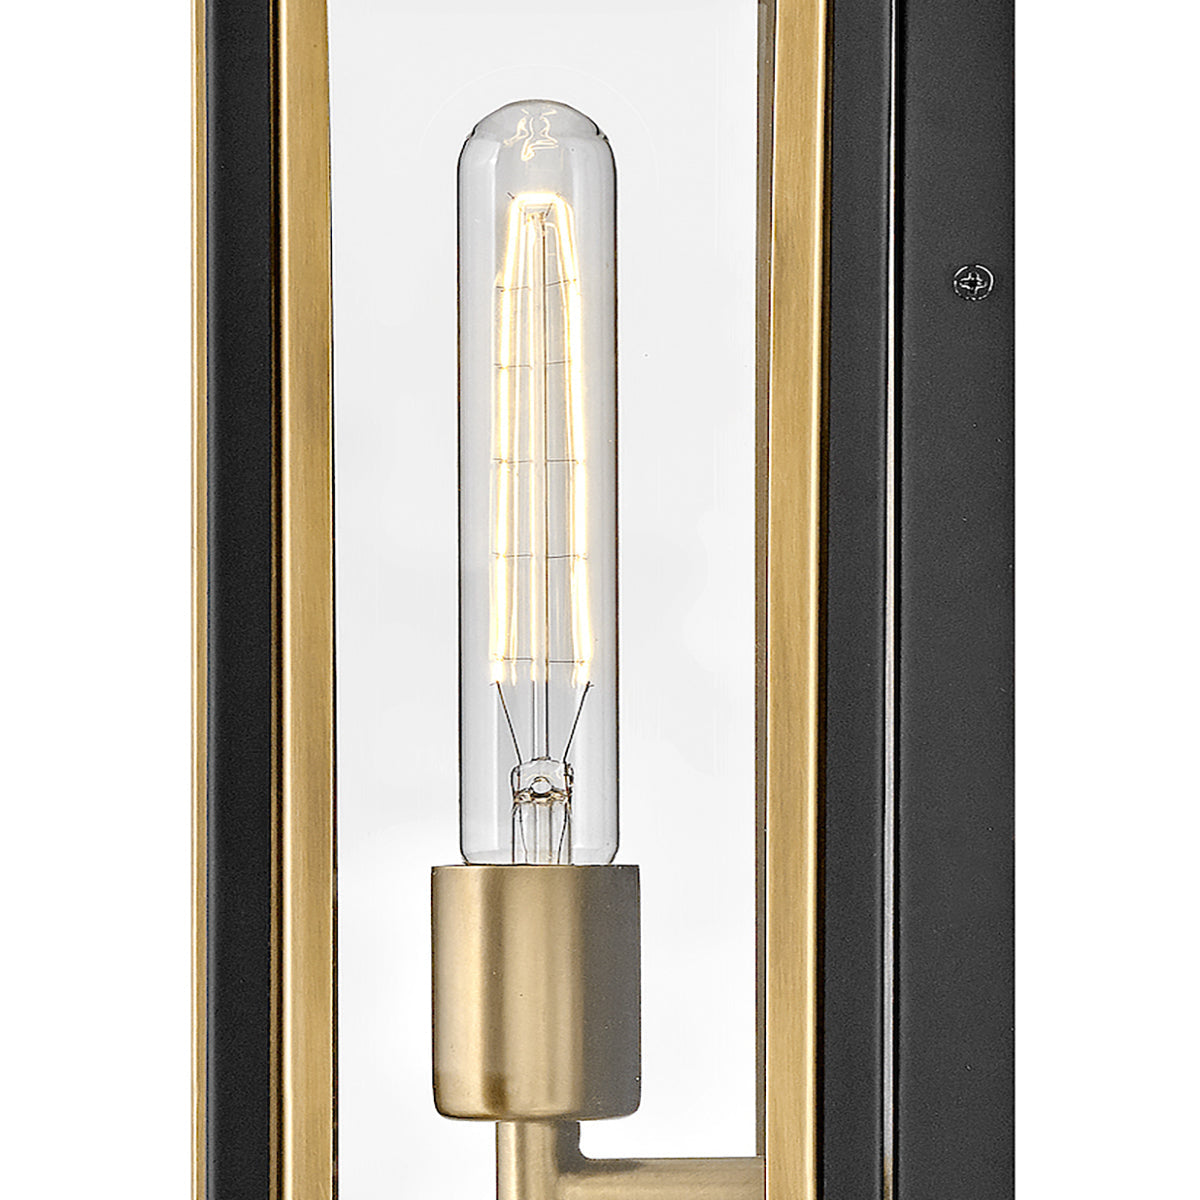 Shaw 2L large wall sconce - 32980BK